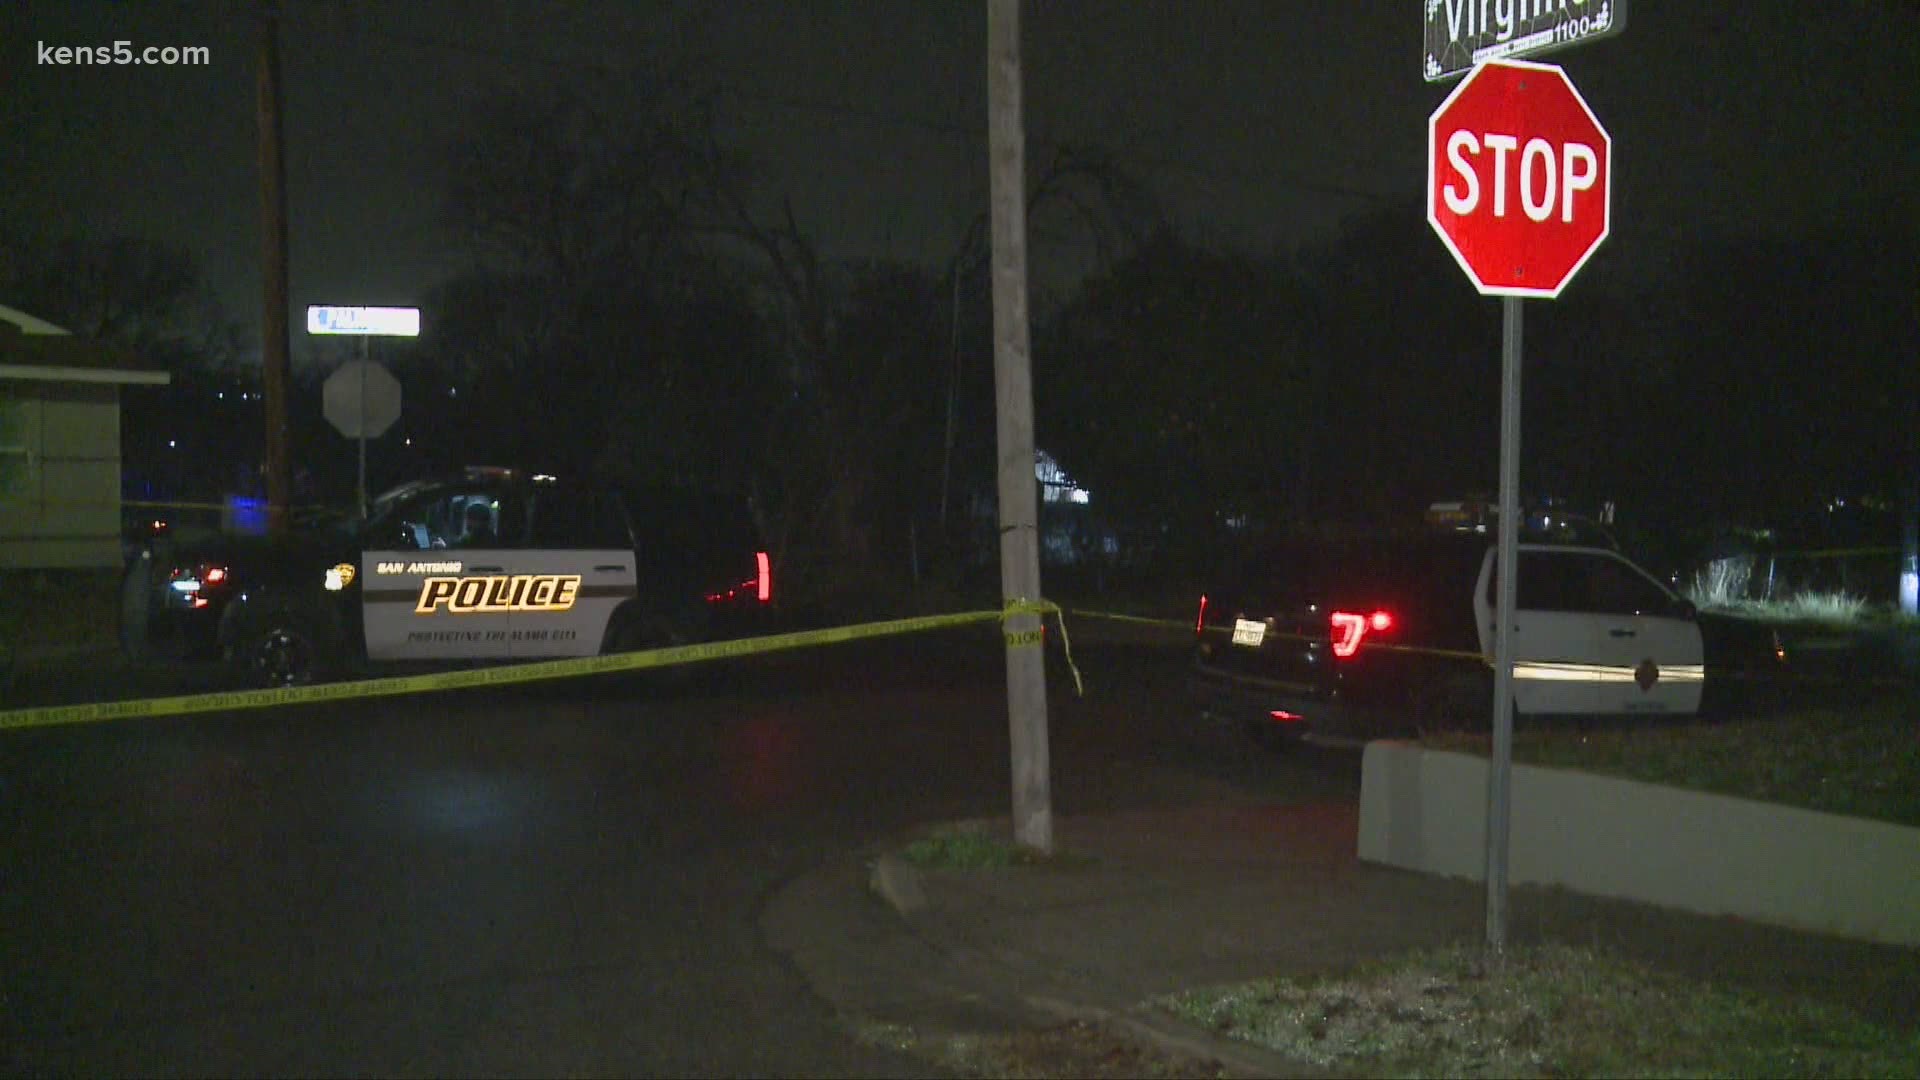 San Antonio Police are launching a homicide investigation after two bodies were found dumped on the city's east side.